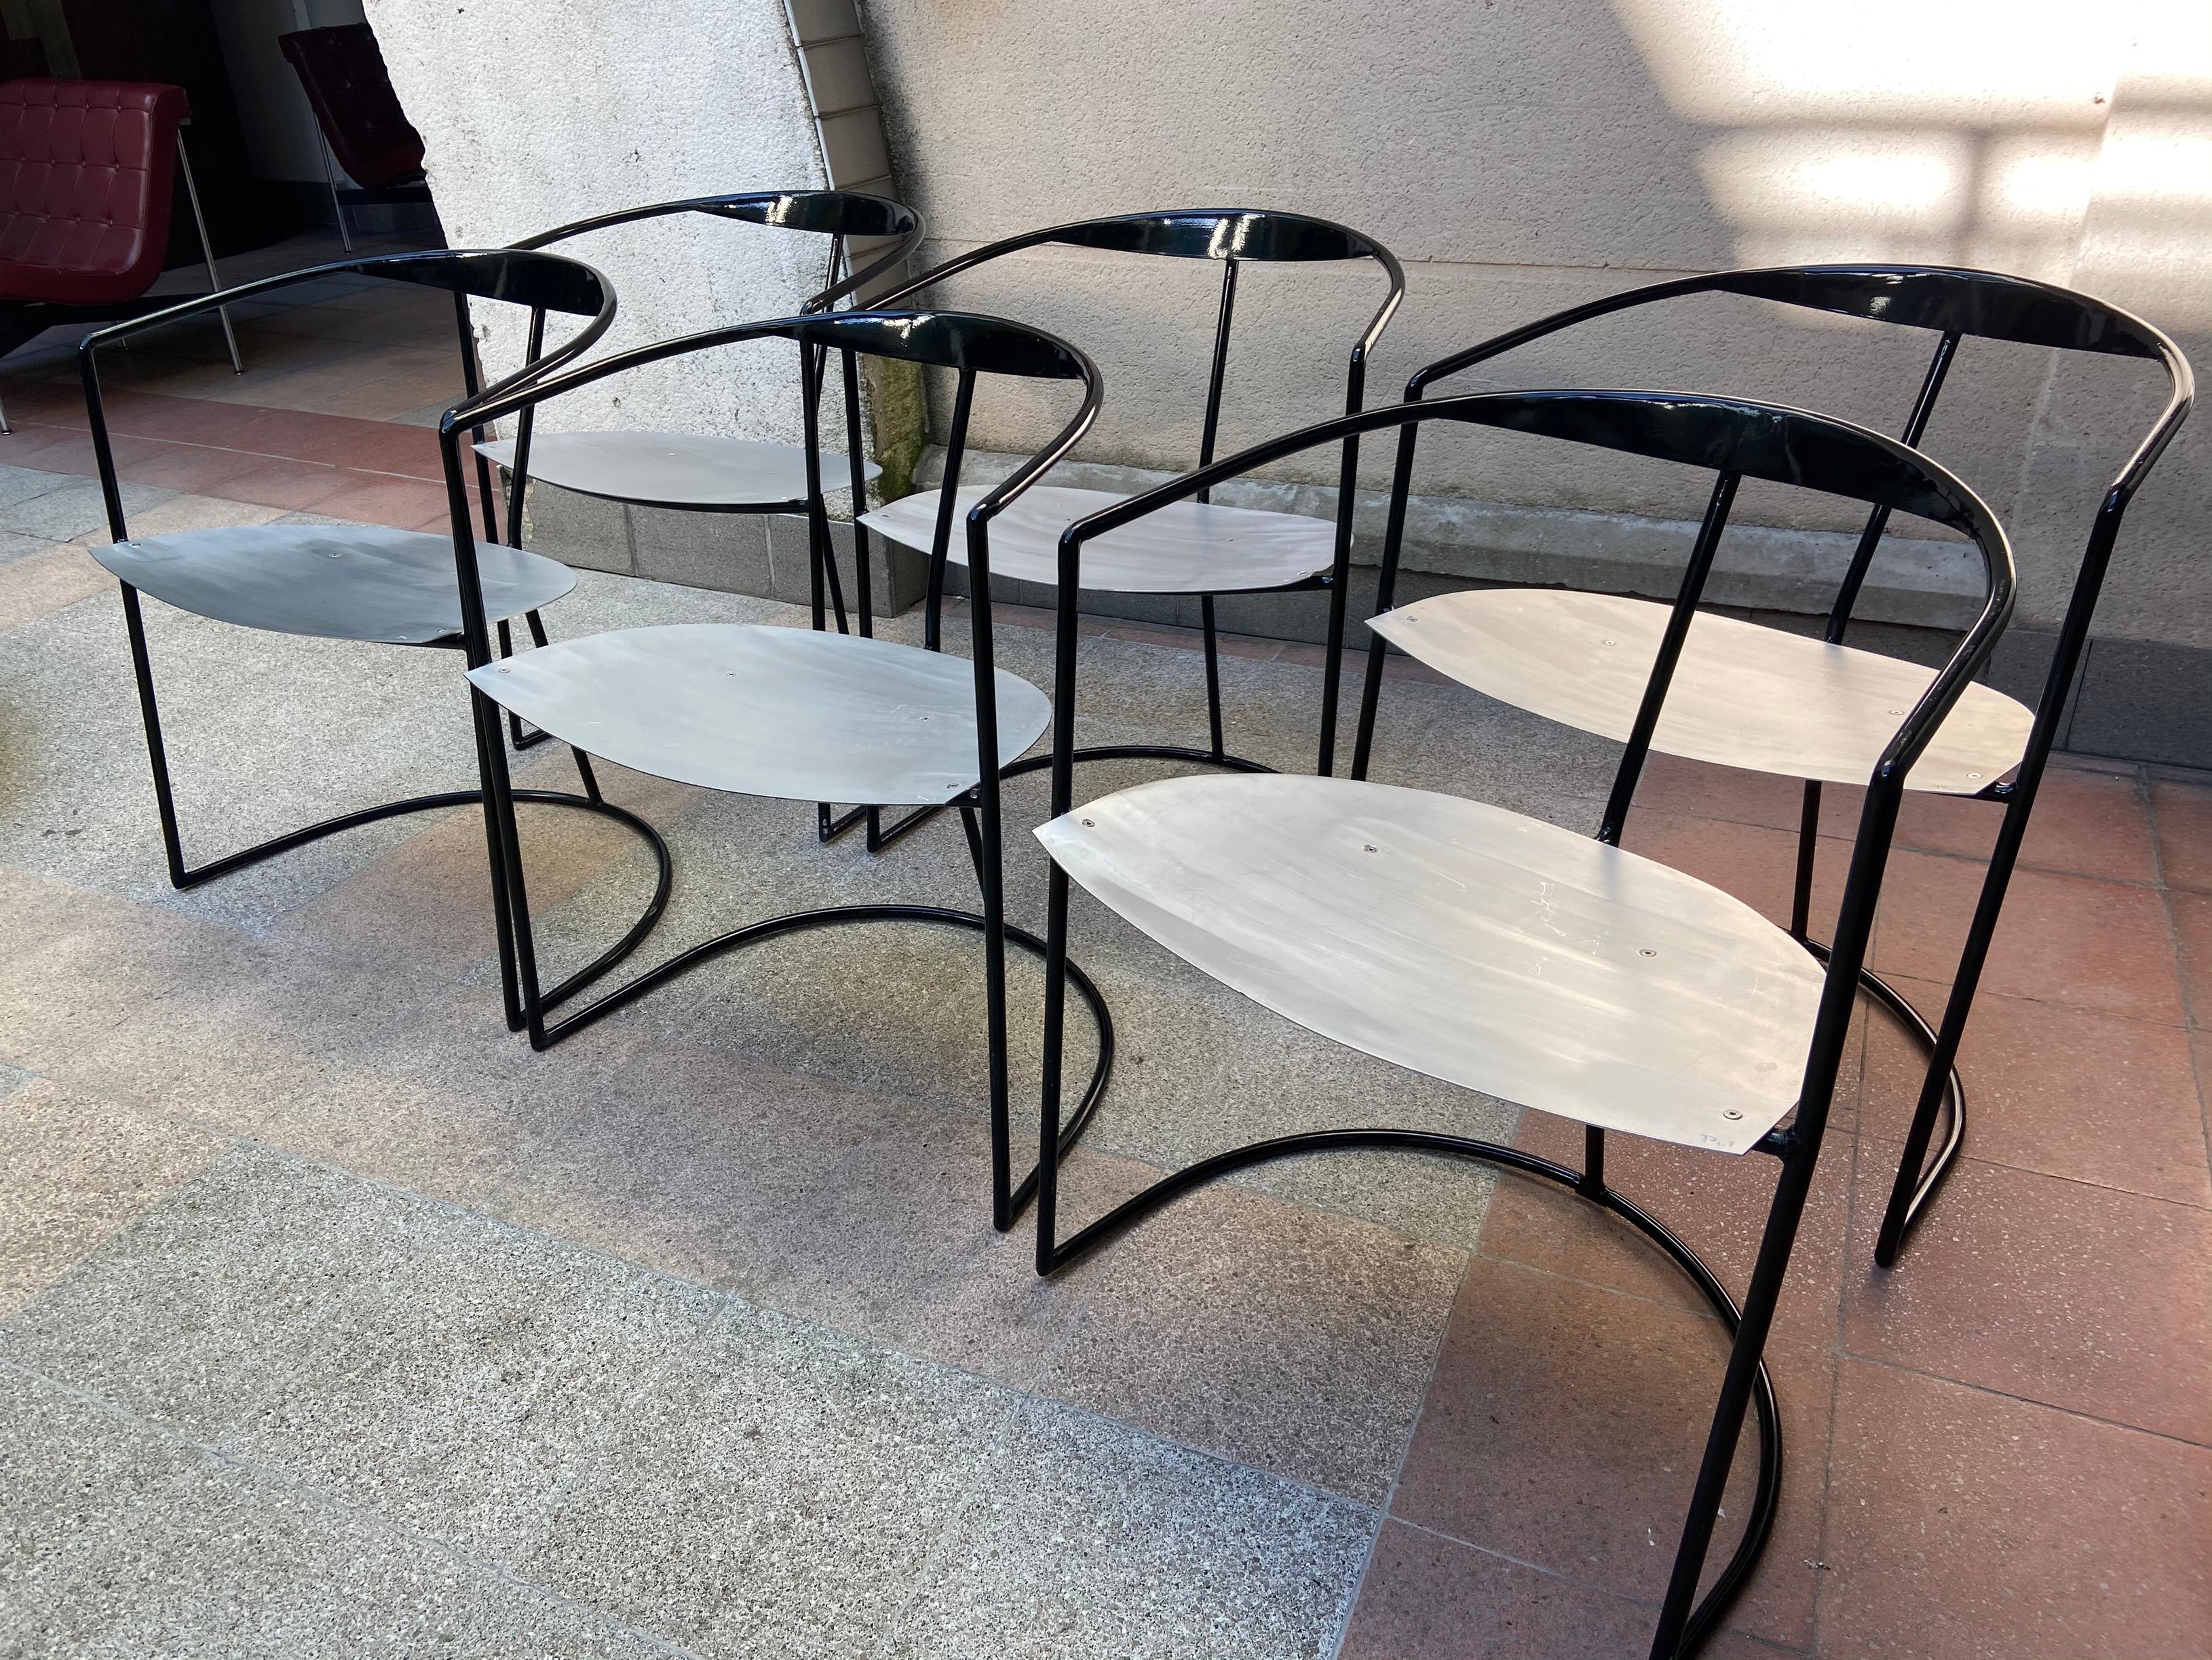 Contemporary Pol Quadens, Set of Table and 6 Chairs, 2000